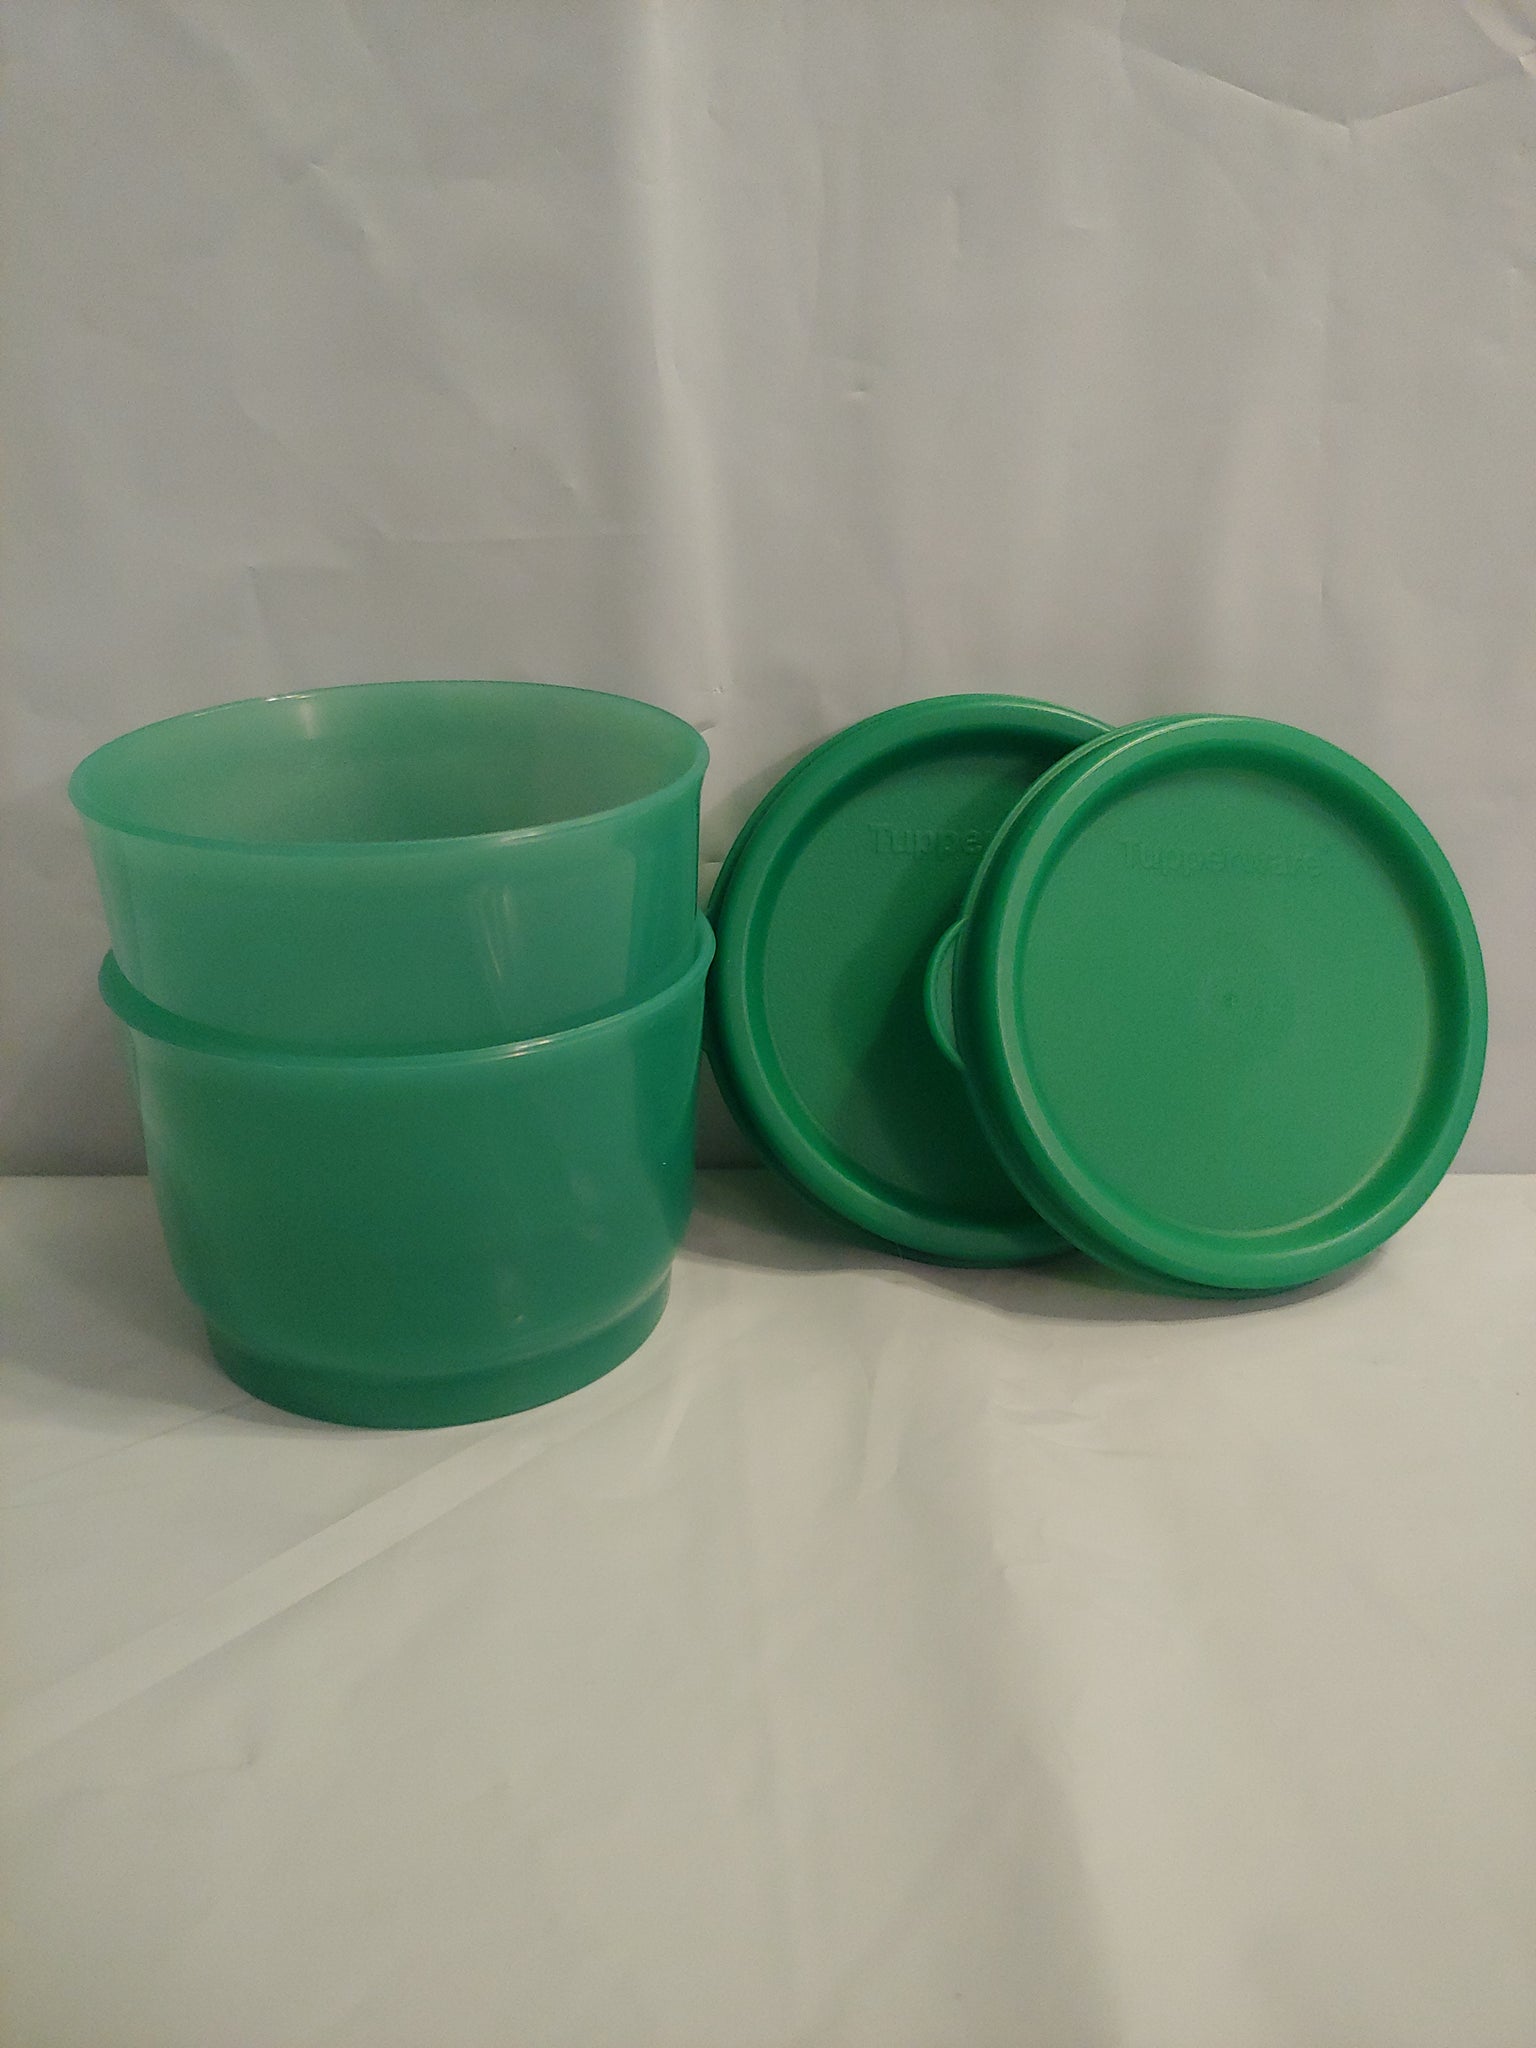 TUPPERWARE Set of 2 - 4-oz Snack Cups Bowls w/ Round Seals CHRISTMAS GREEN w/ MATCHING SEALS